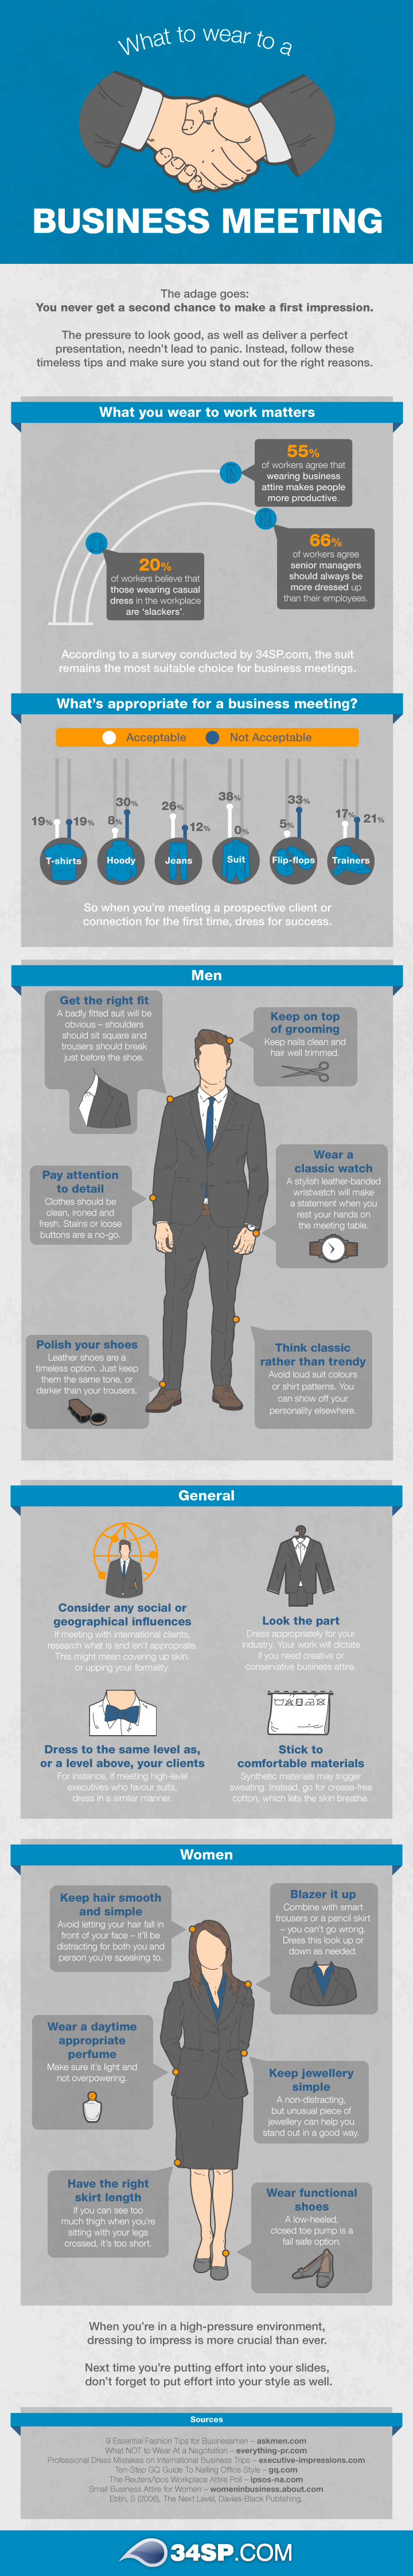 What-to-Wear-to-a-Business-Meeting